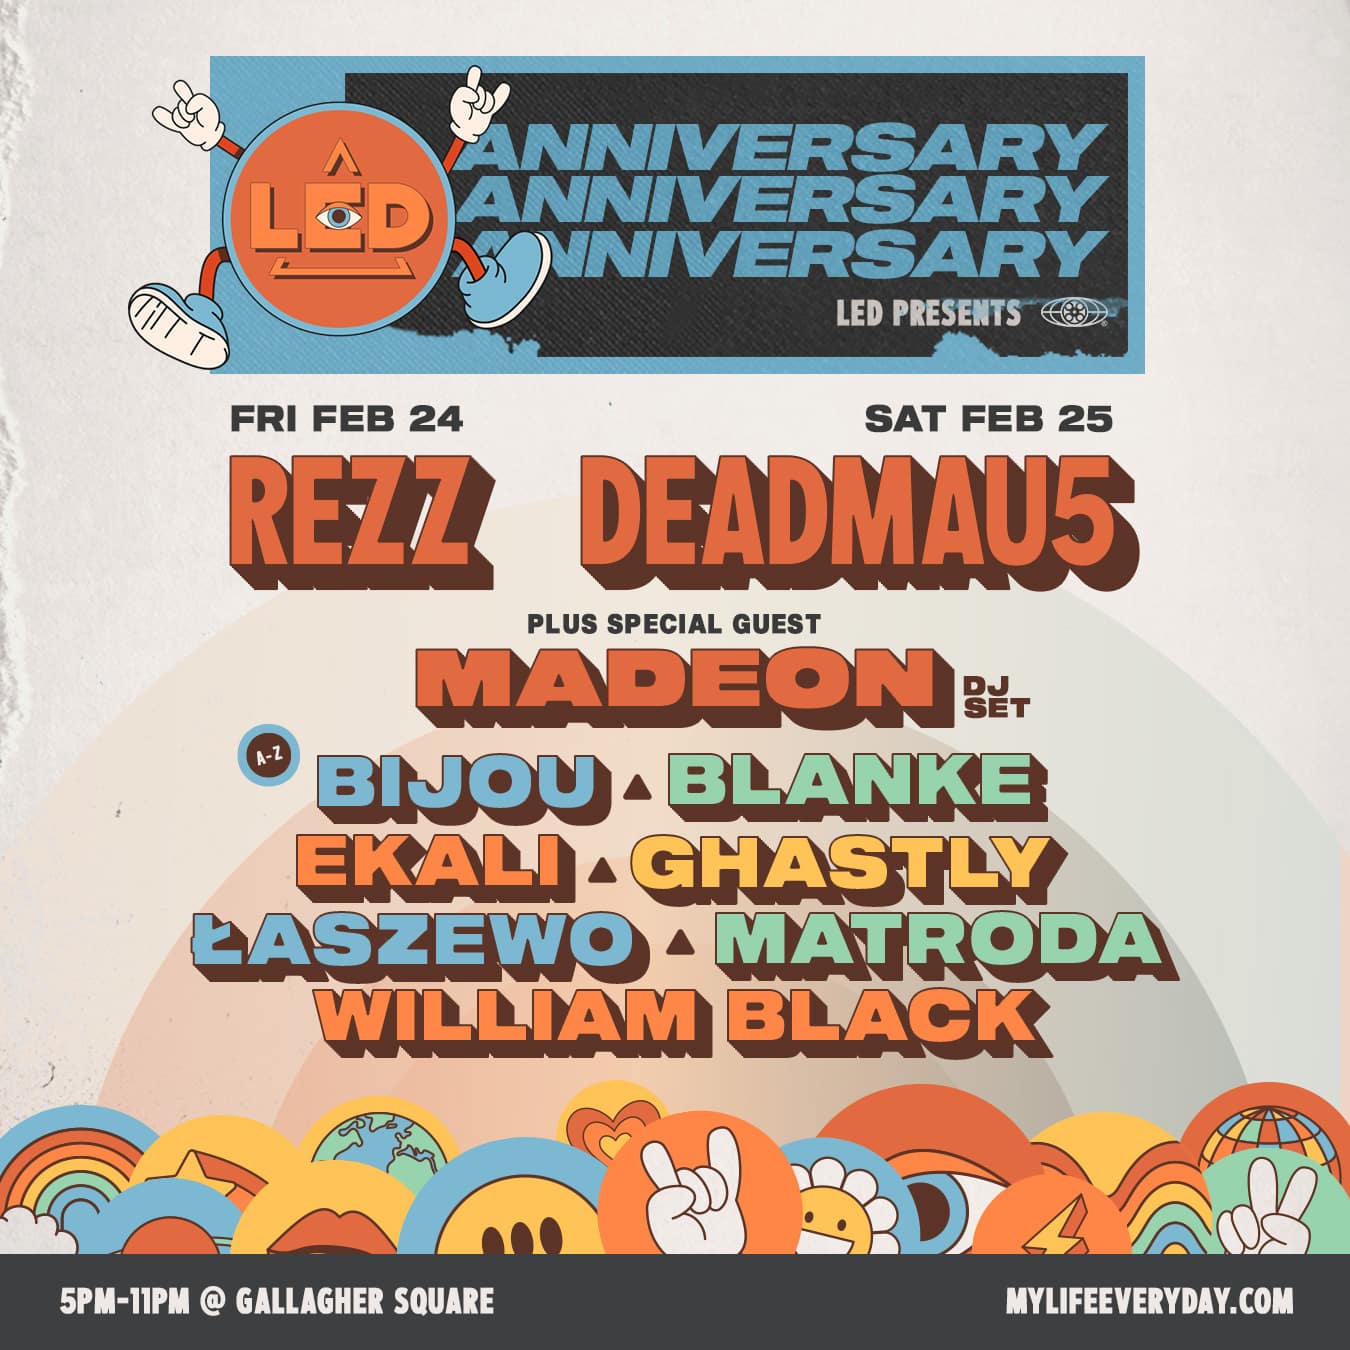 LED Anniversary Reveals Full Lineup for 2023 Edition EDM Identity